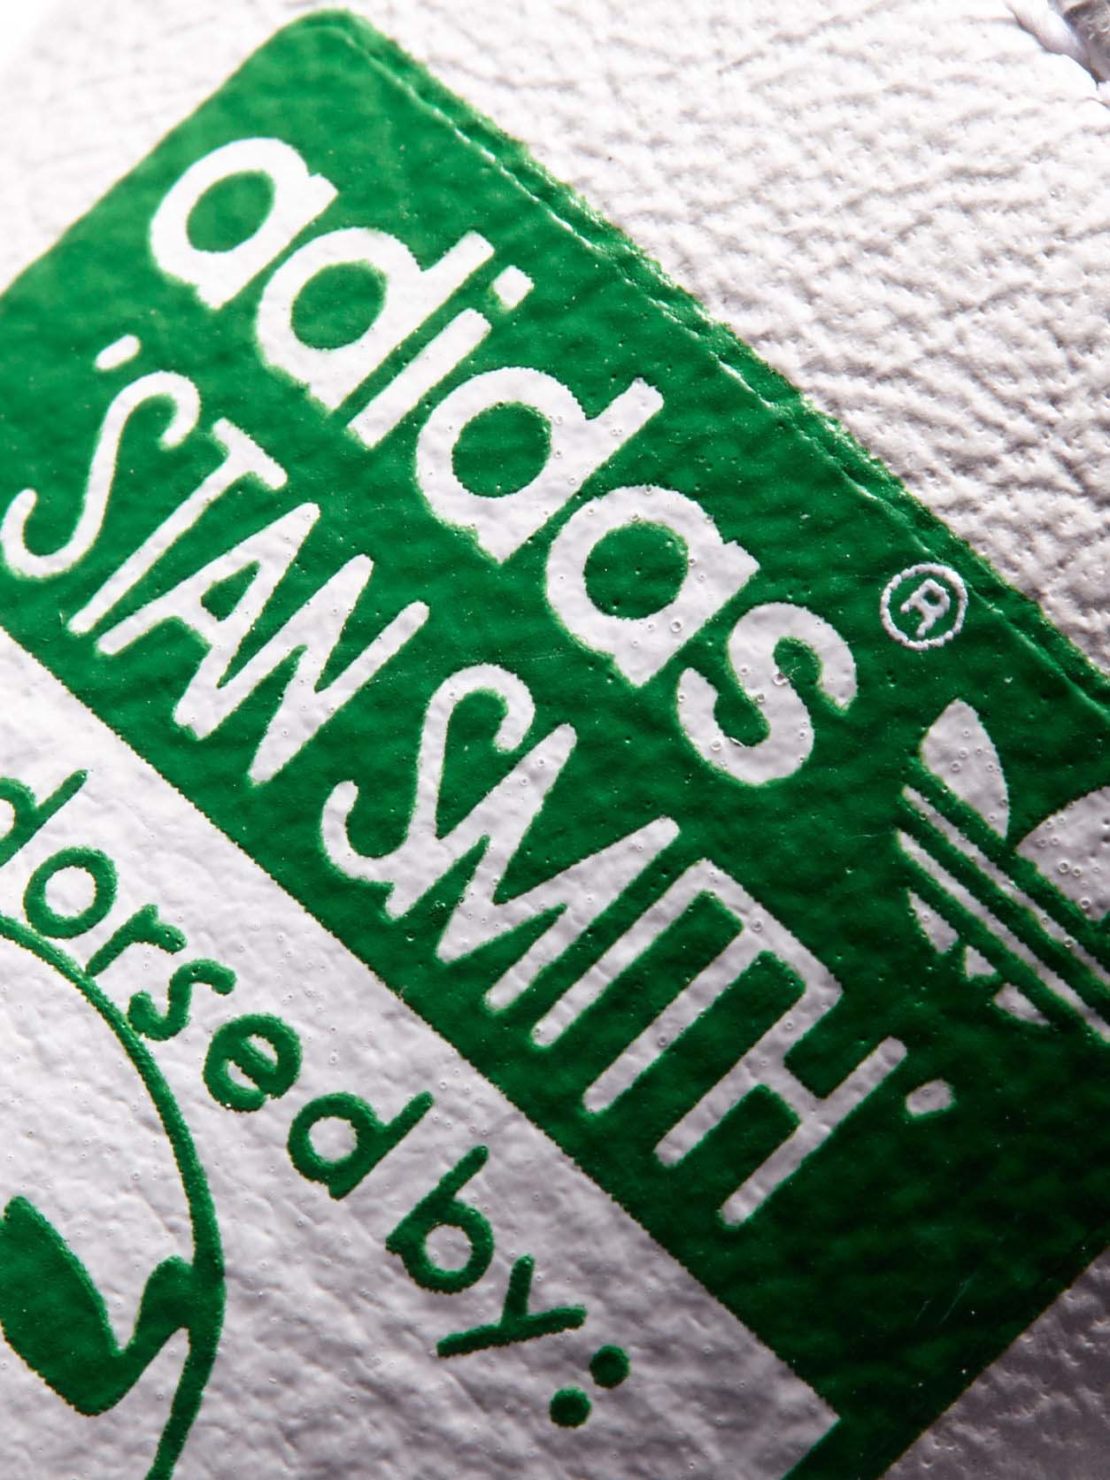 The tongue of the Adidas shoe bearing Smith's name